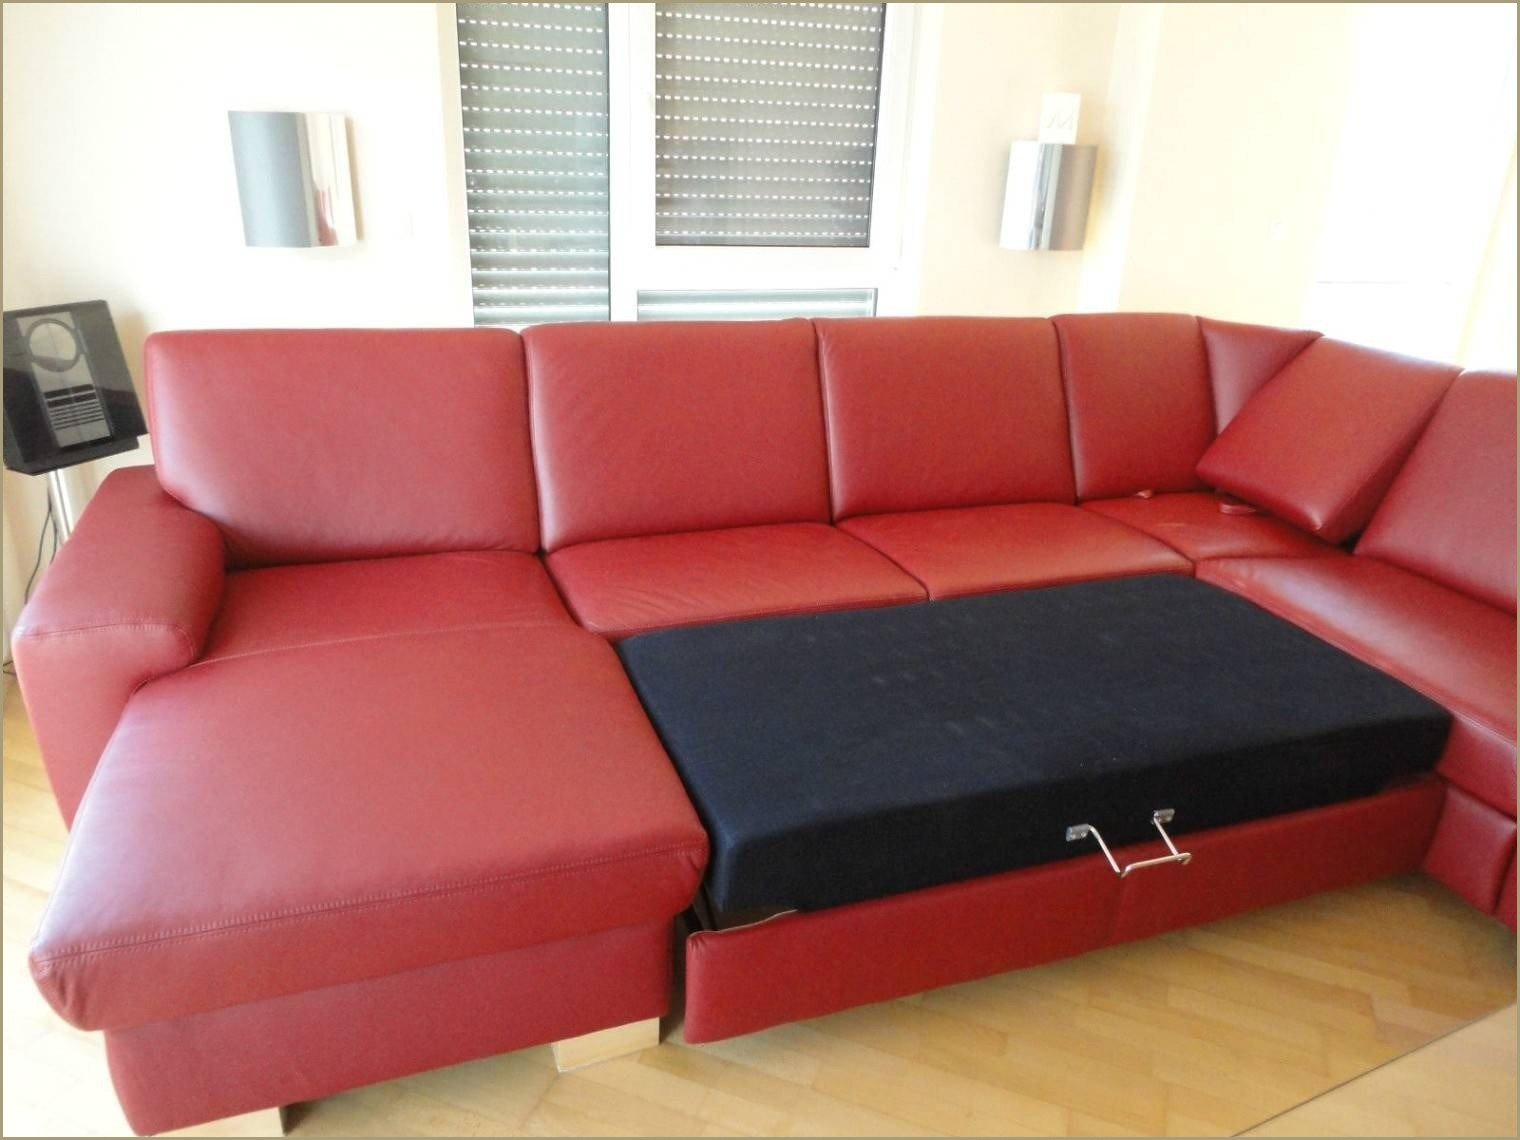 L Couch Mit Schlaffunktion
 Couch Bettfunktion Beste L Couch Mit Schlaffunktion Genial